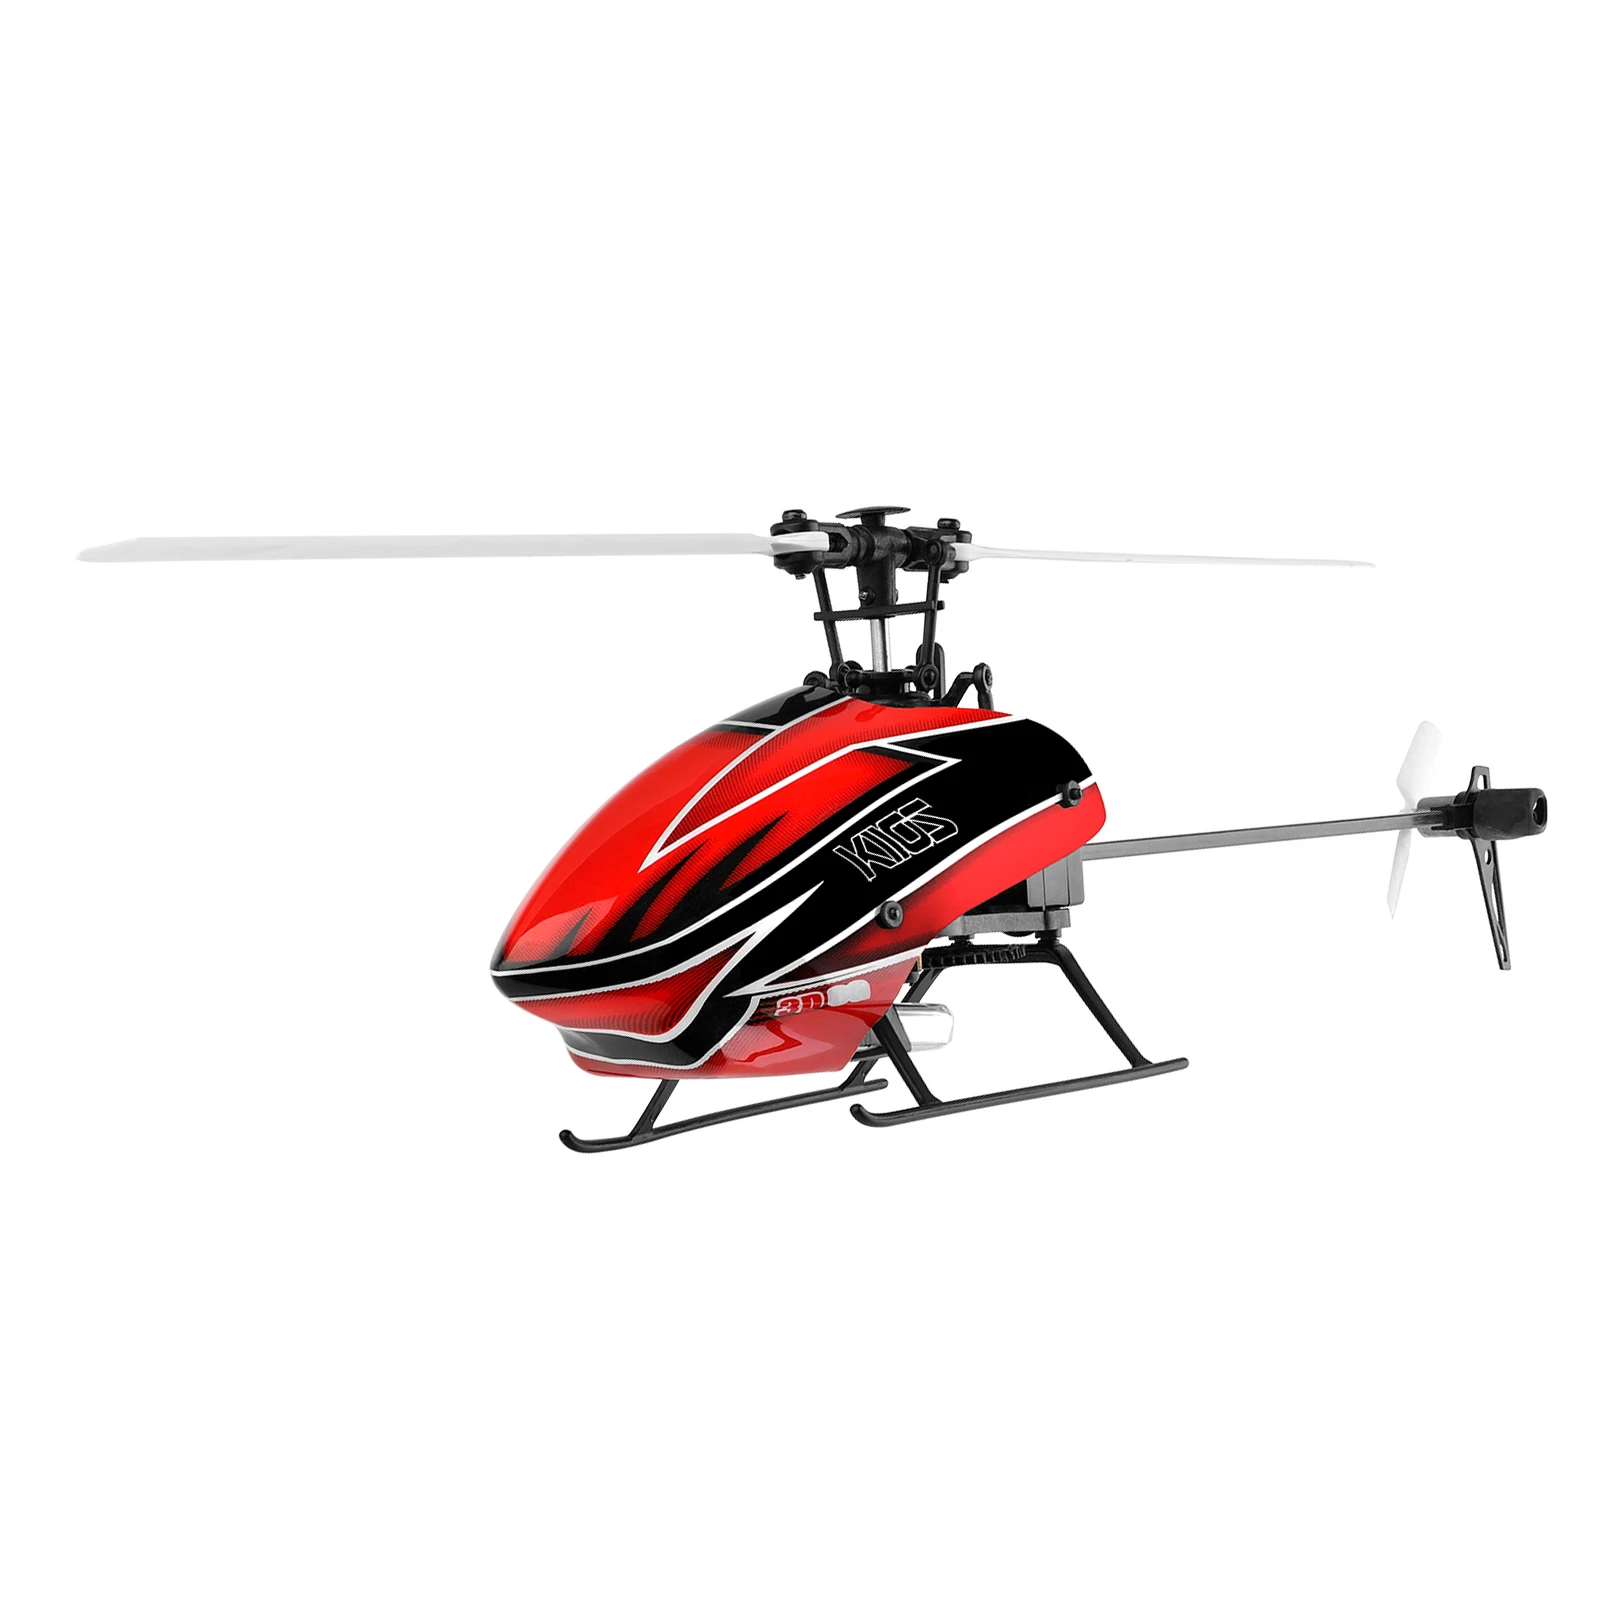 flying toy helicopter WLtoys XK Upgrade K110S Radio Contorl Drone 2.4G 6CH 3D 6G System Brushless Motor RC Quadcopter Remote Control Airplane For Kids top RC Helicopters RC Helicopters